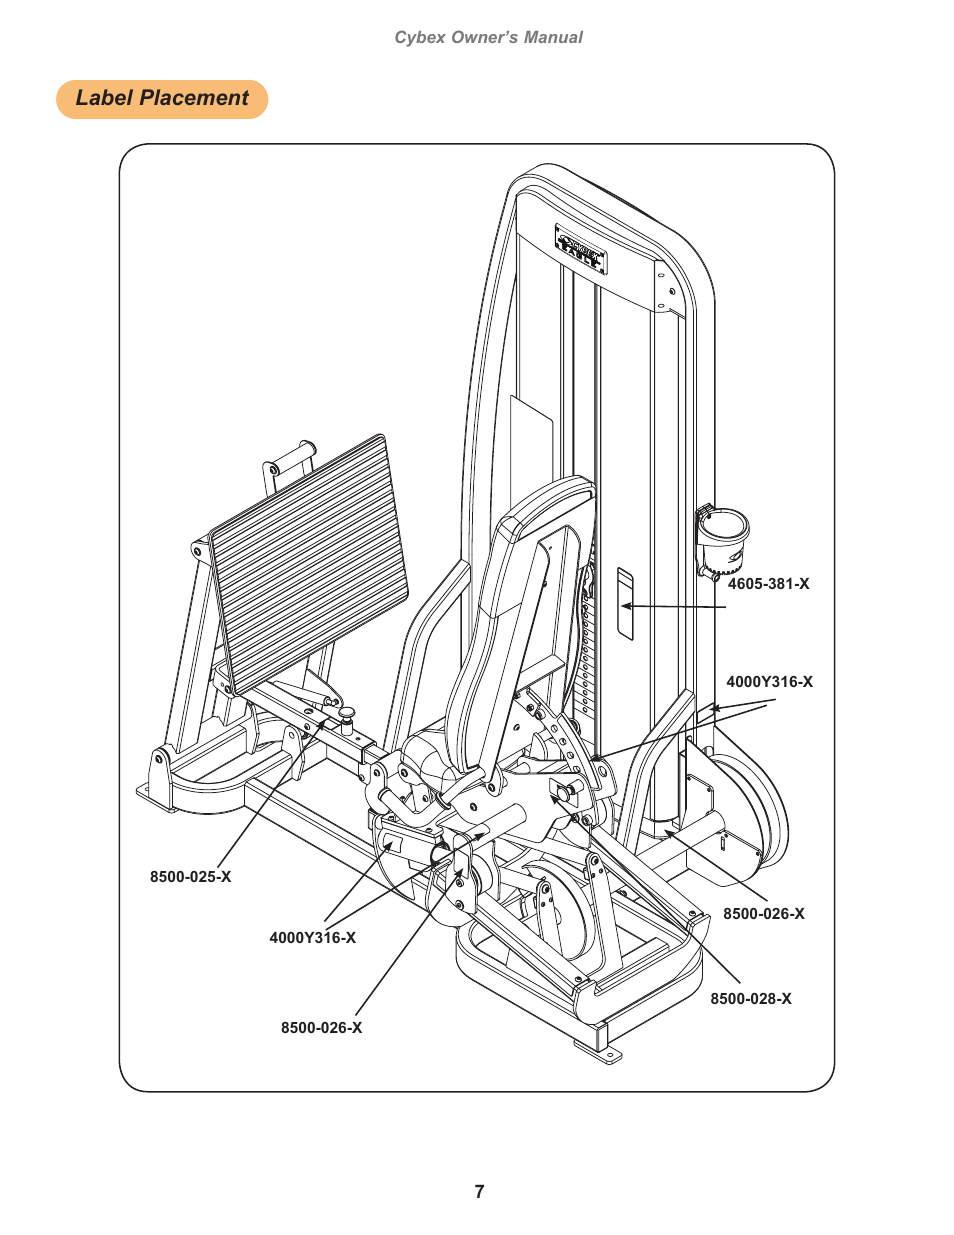 Label placement, Cybex owner's manual | Cybex 11040 Eagle Leg Press User  Manual | Page 7 / 30 | Original mode